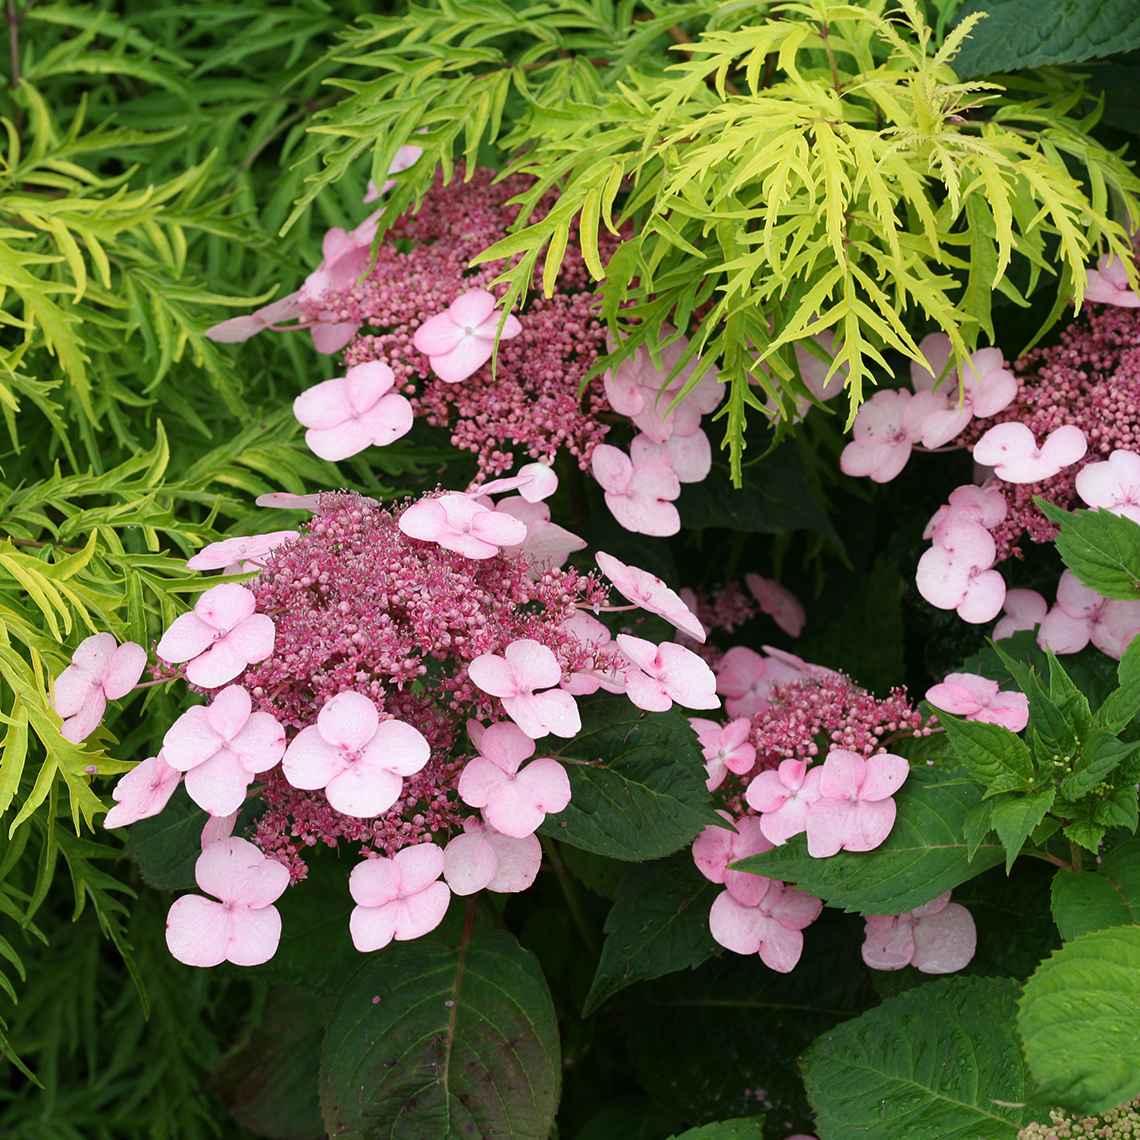 Closeup of four blooms on Twirligig mountain hydrangea growing in front of a lace leaf yellow elderberry